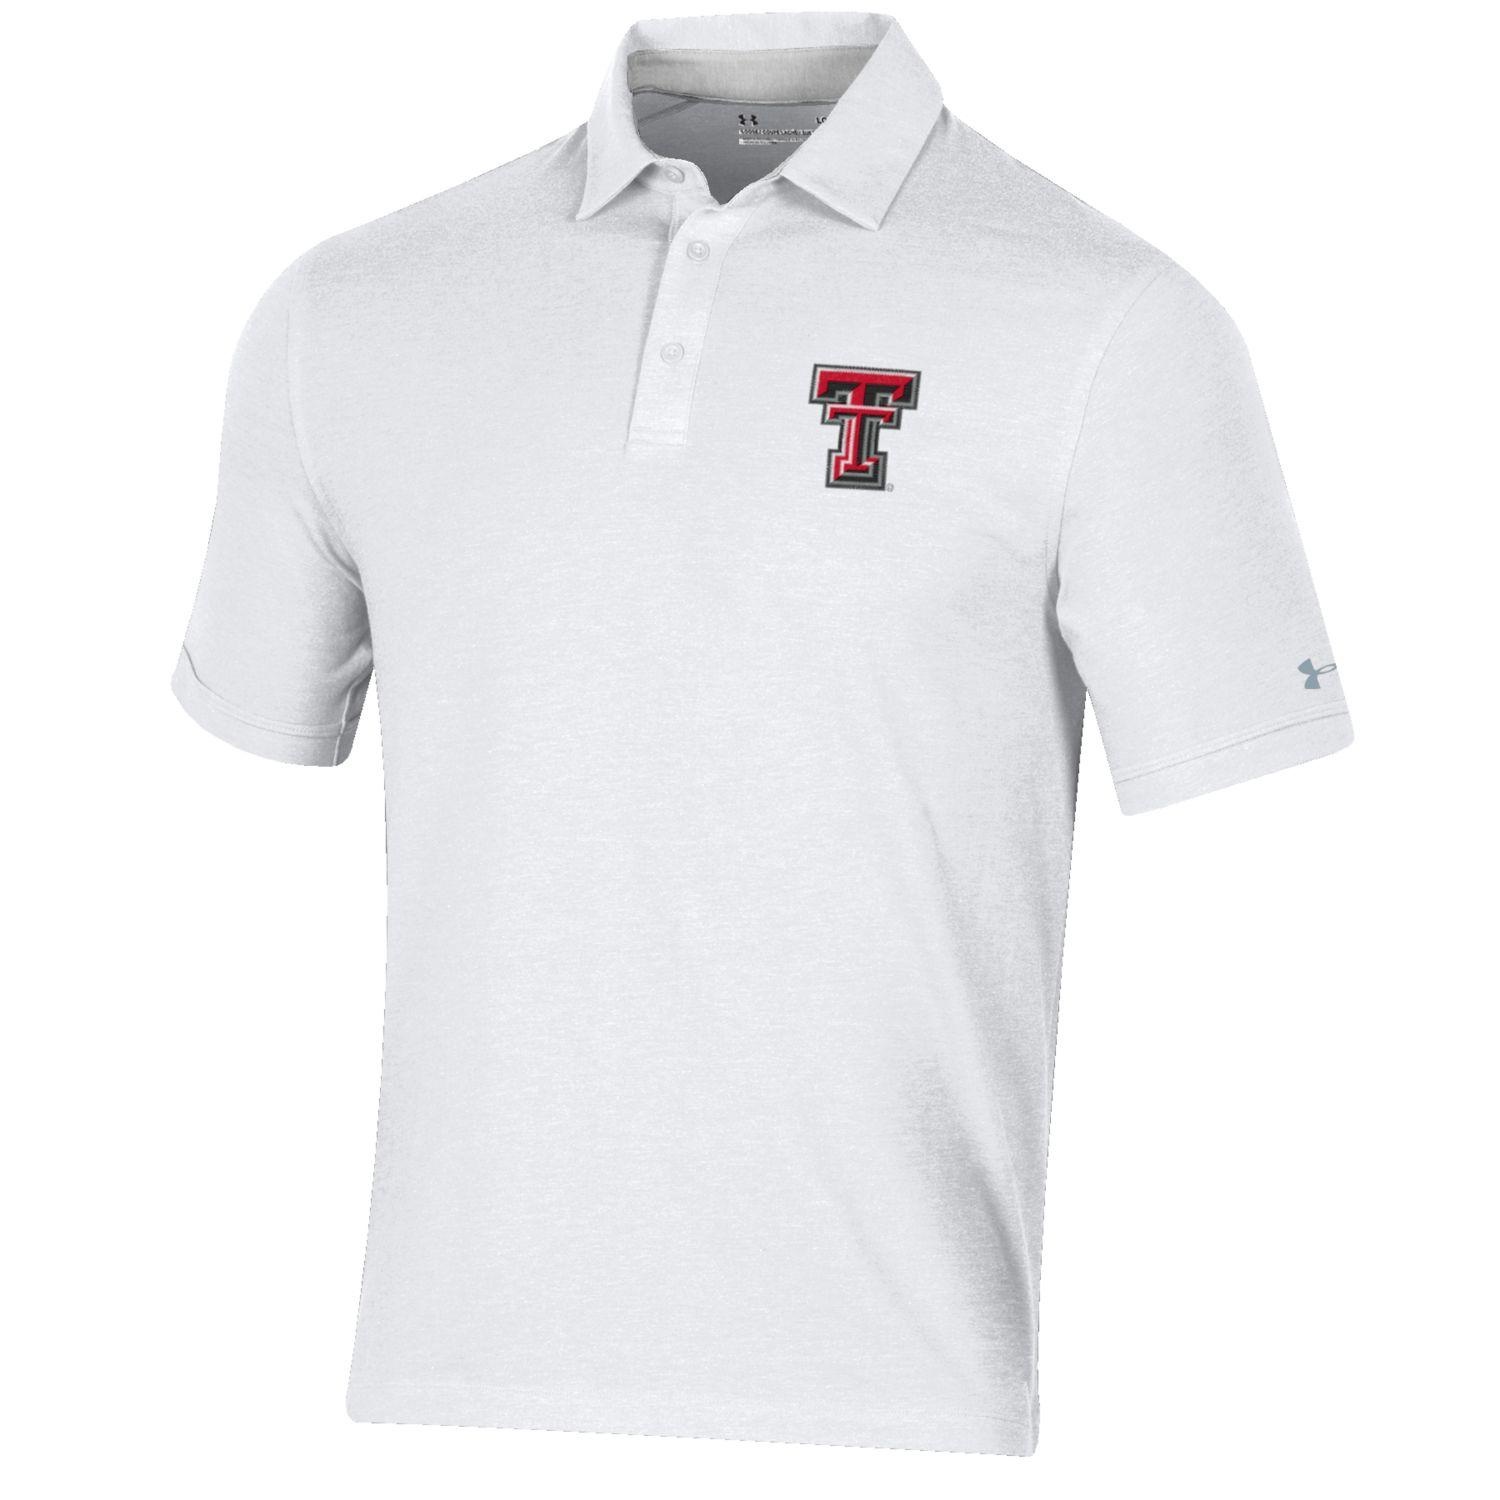 Under Armour Throwback Charged Polo - The